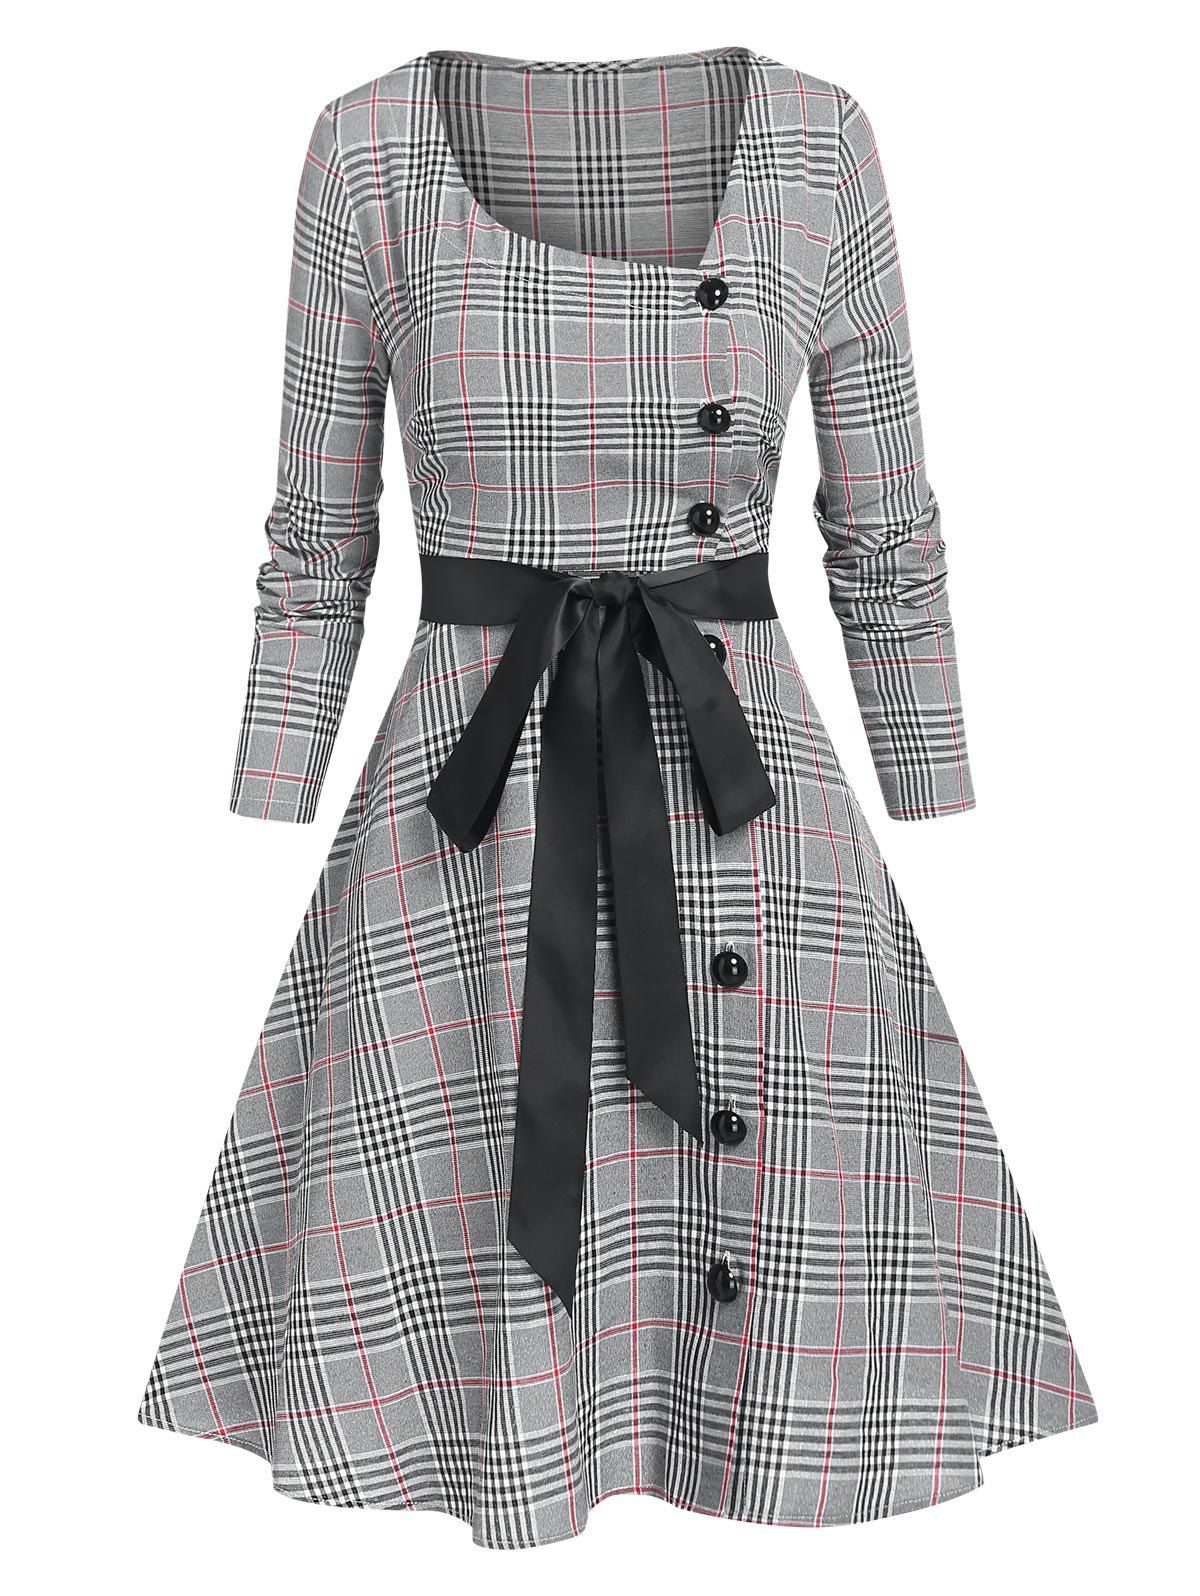 Skew Neck Plaid Fit and Flare Dress - GRAY XXL